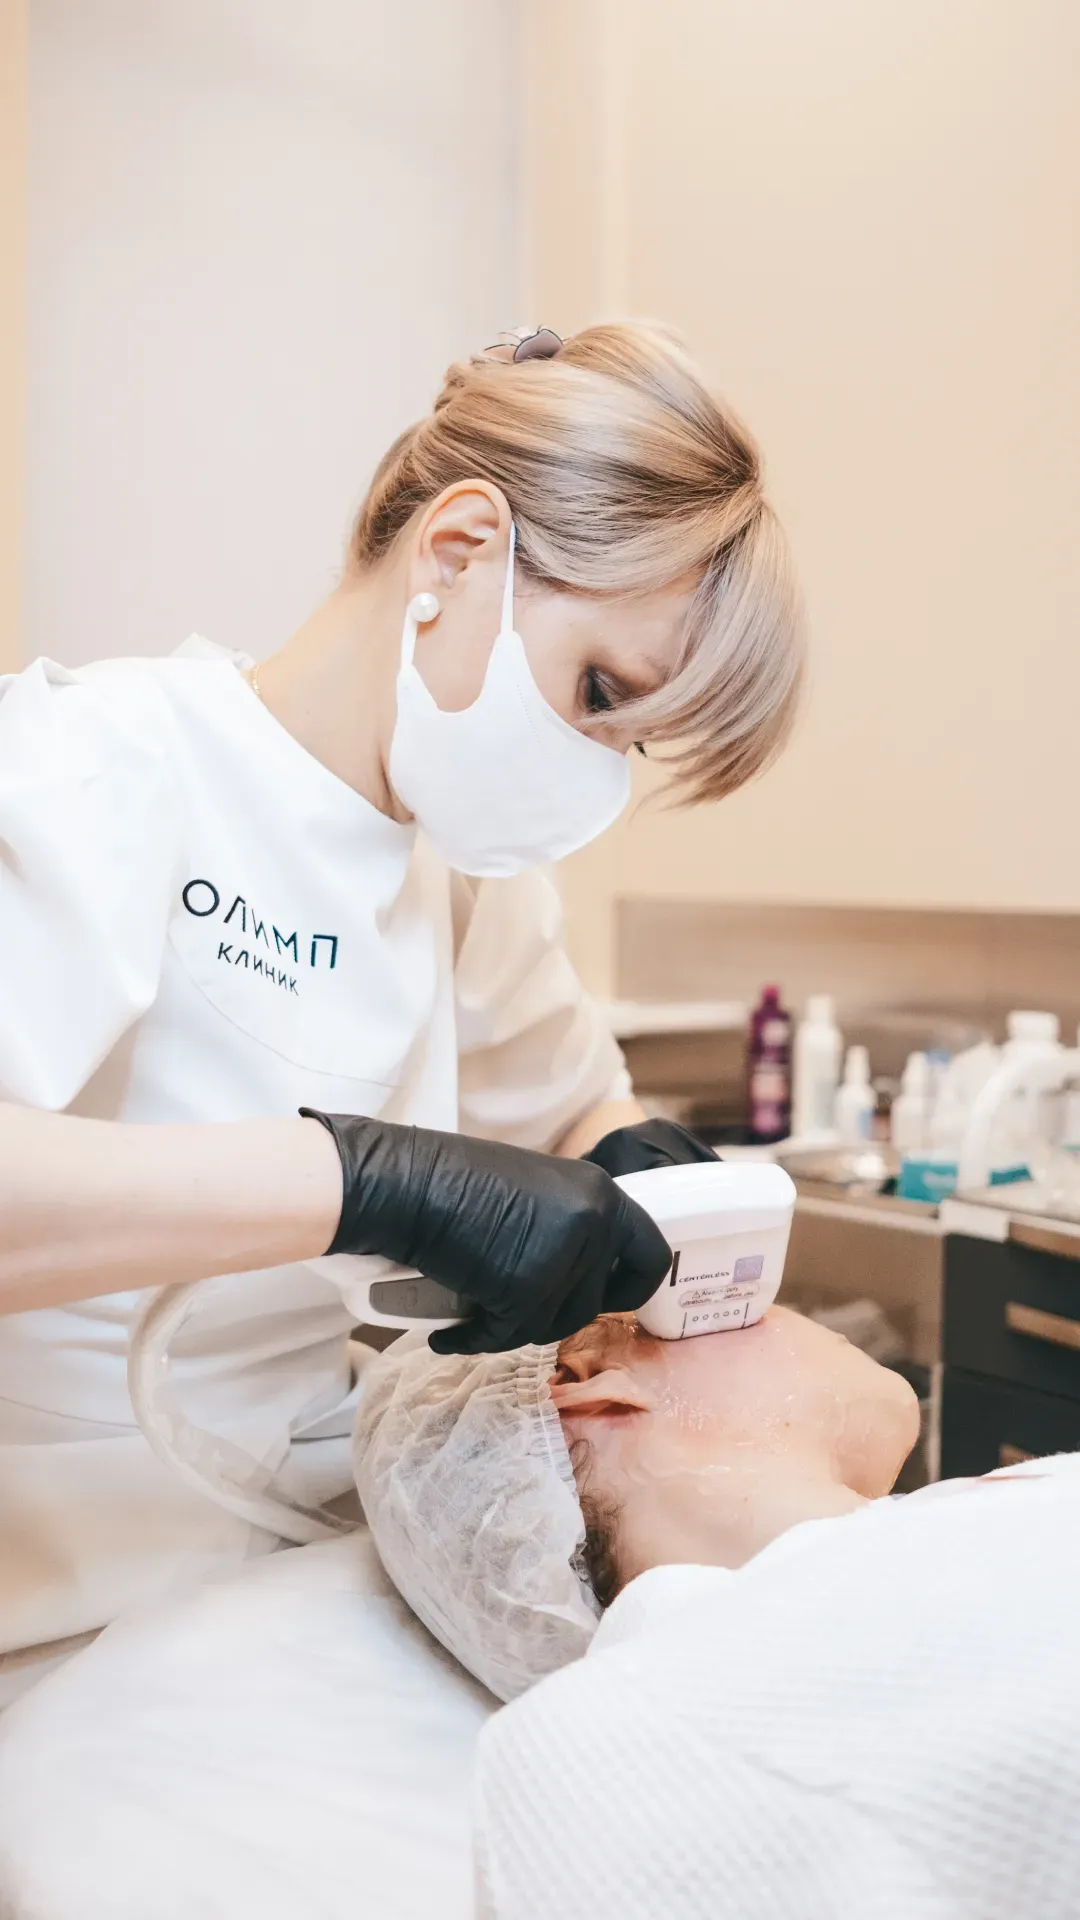 The specialist uses the best techniques to preserve the beauty and youth of the skin